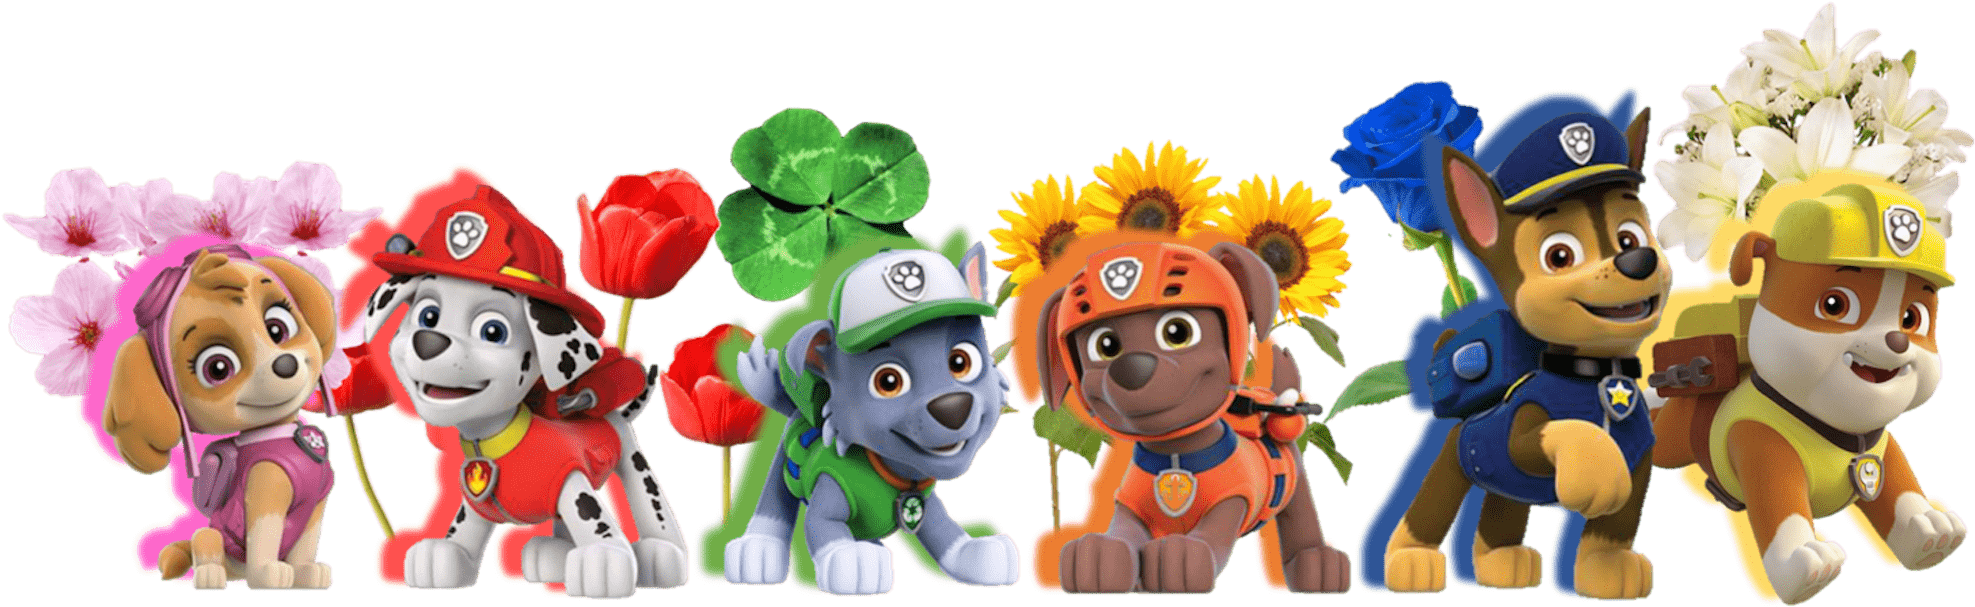 Paw Patrol Characters Floral Backdrop PNG